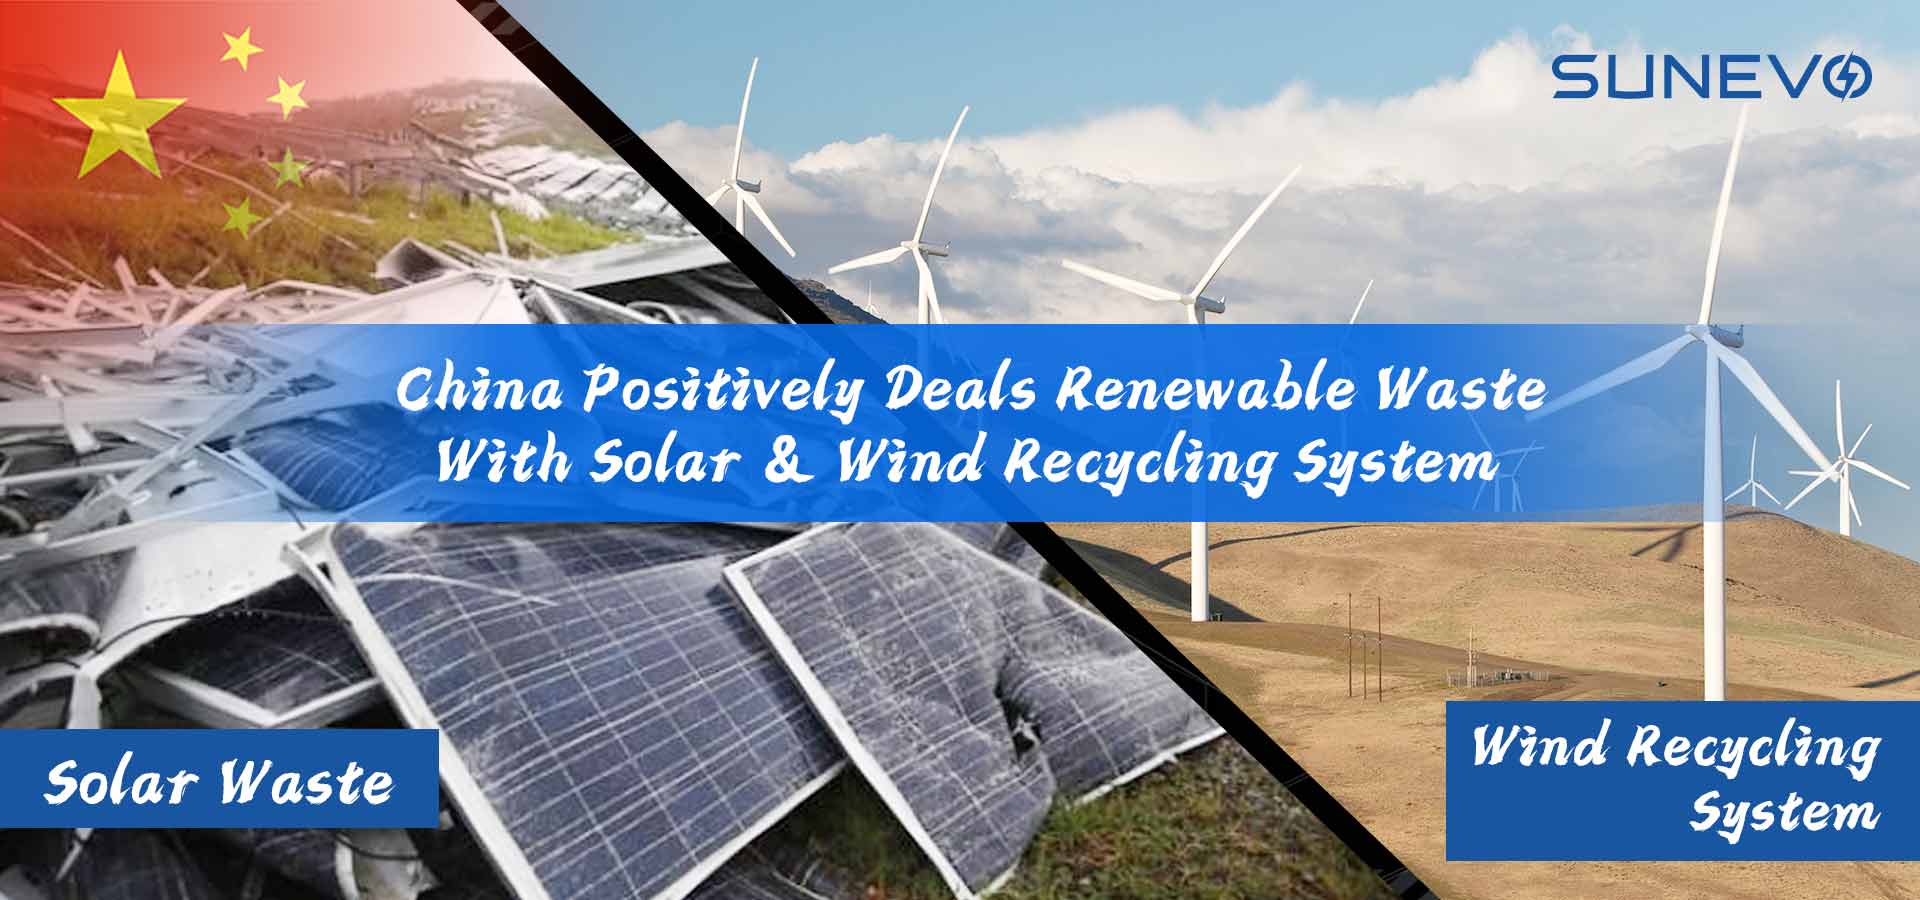 China Deals Renewable Waste with Solar & Wind Recycling Systems